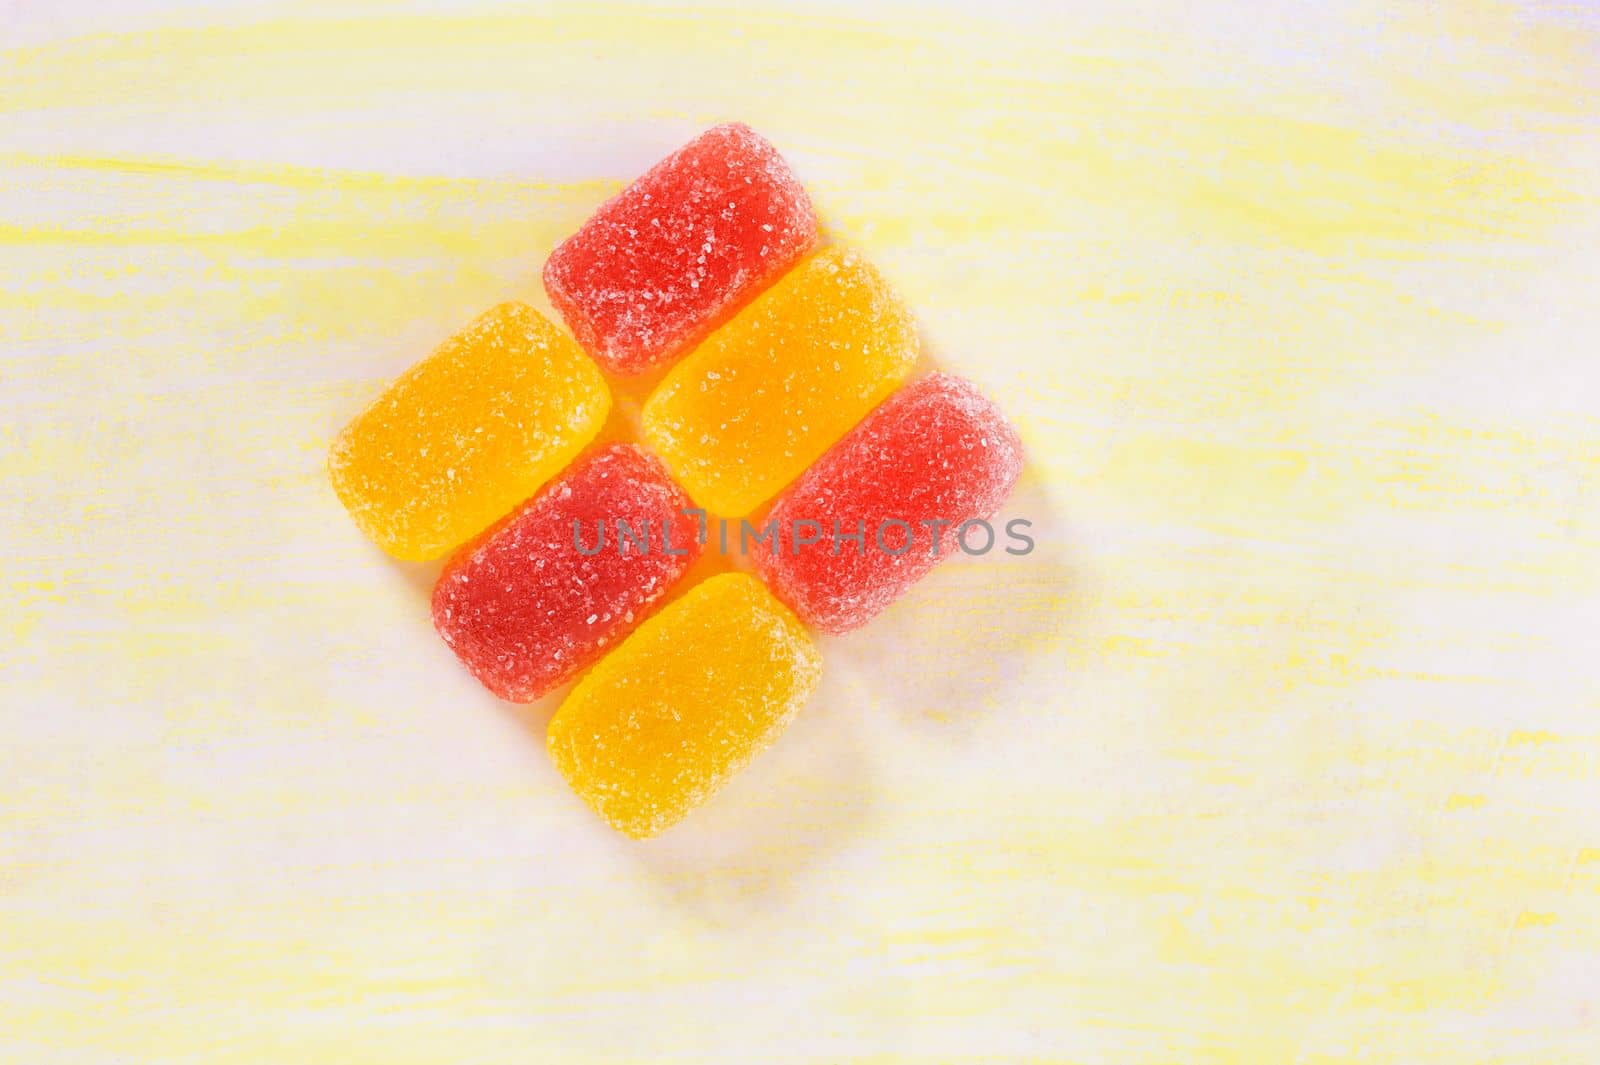 Red and yellow jelly candies by victimewalker